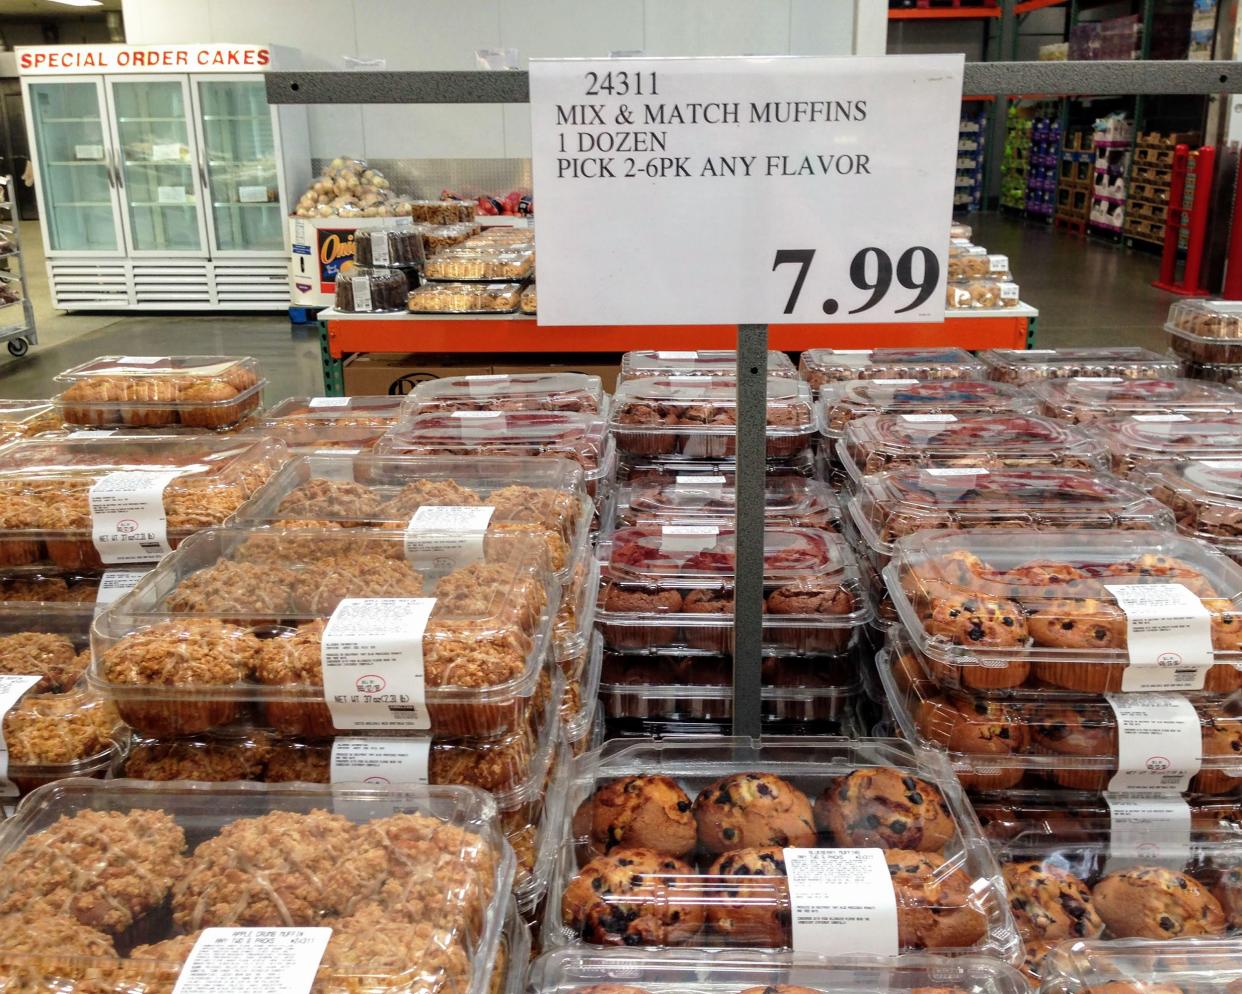 Bakery section at Costco showing muffins